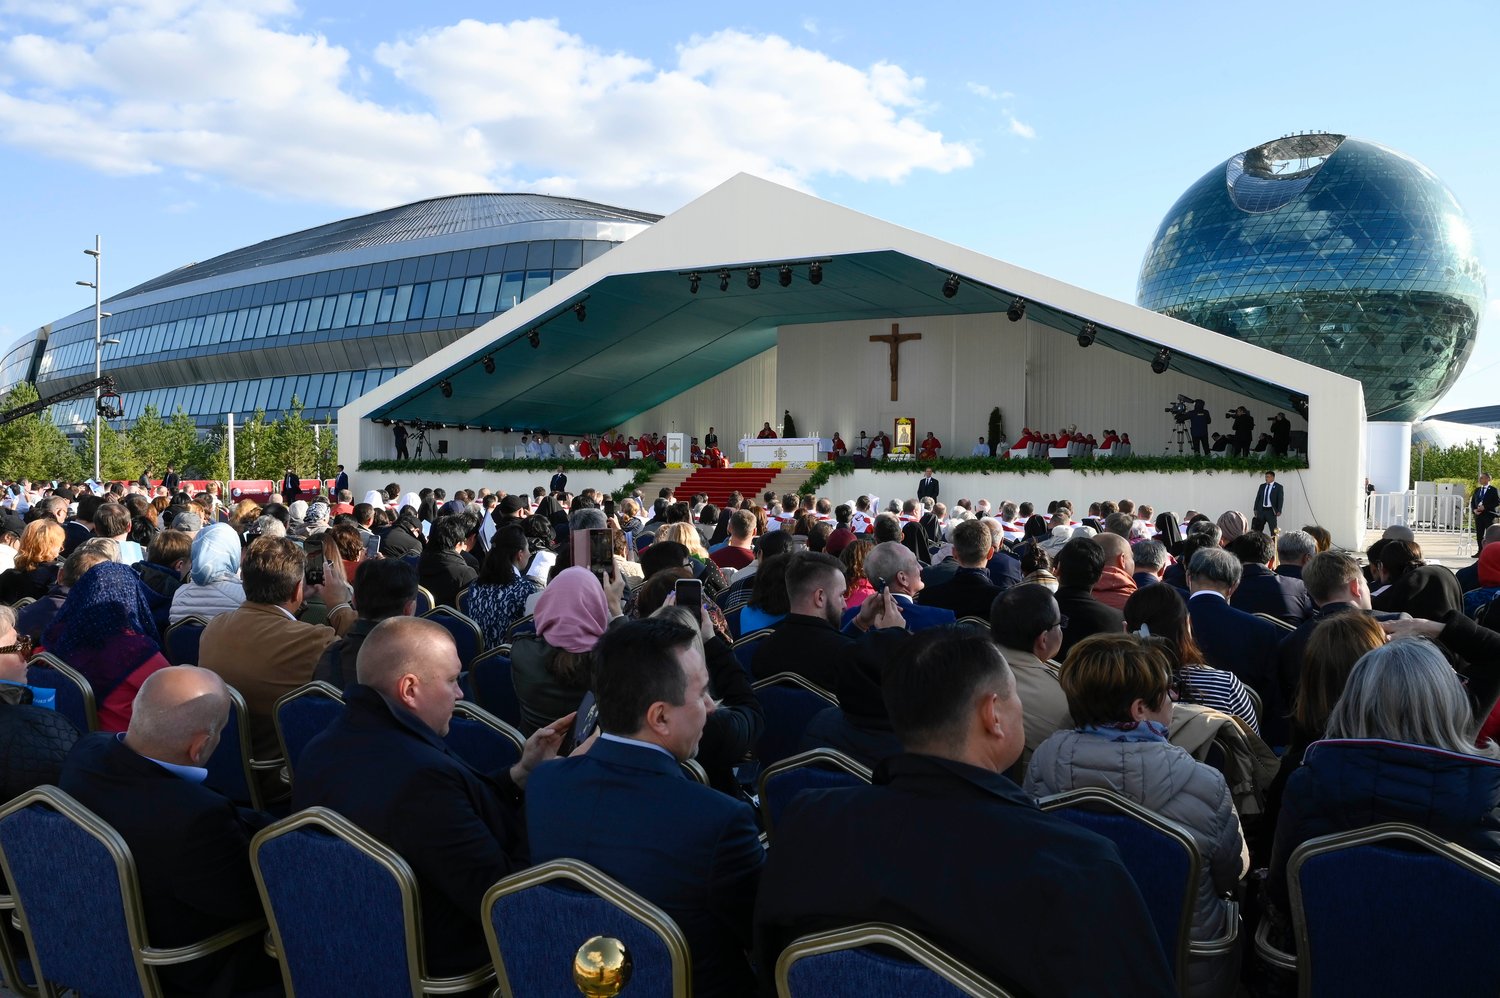 Pope Francis celebrates Mass at the Expo grounds in Nur-Sultan, Kazakhstan, Sept. 14.